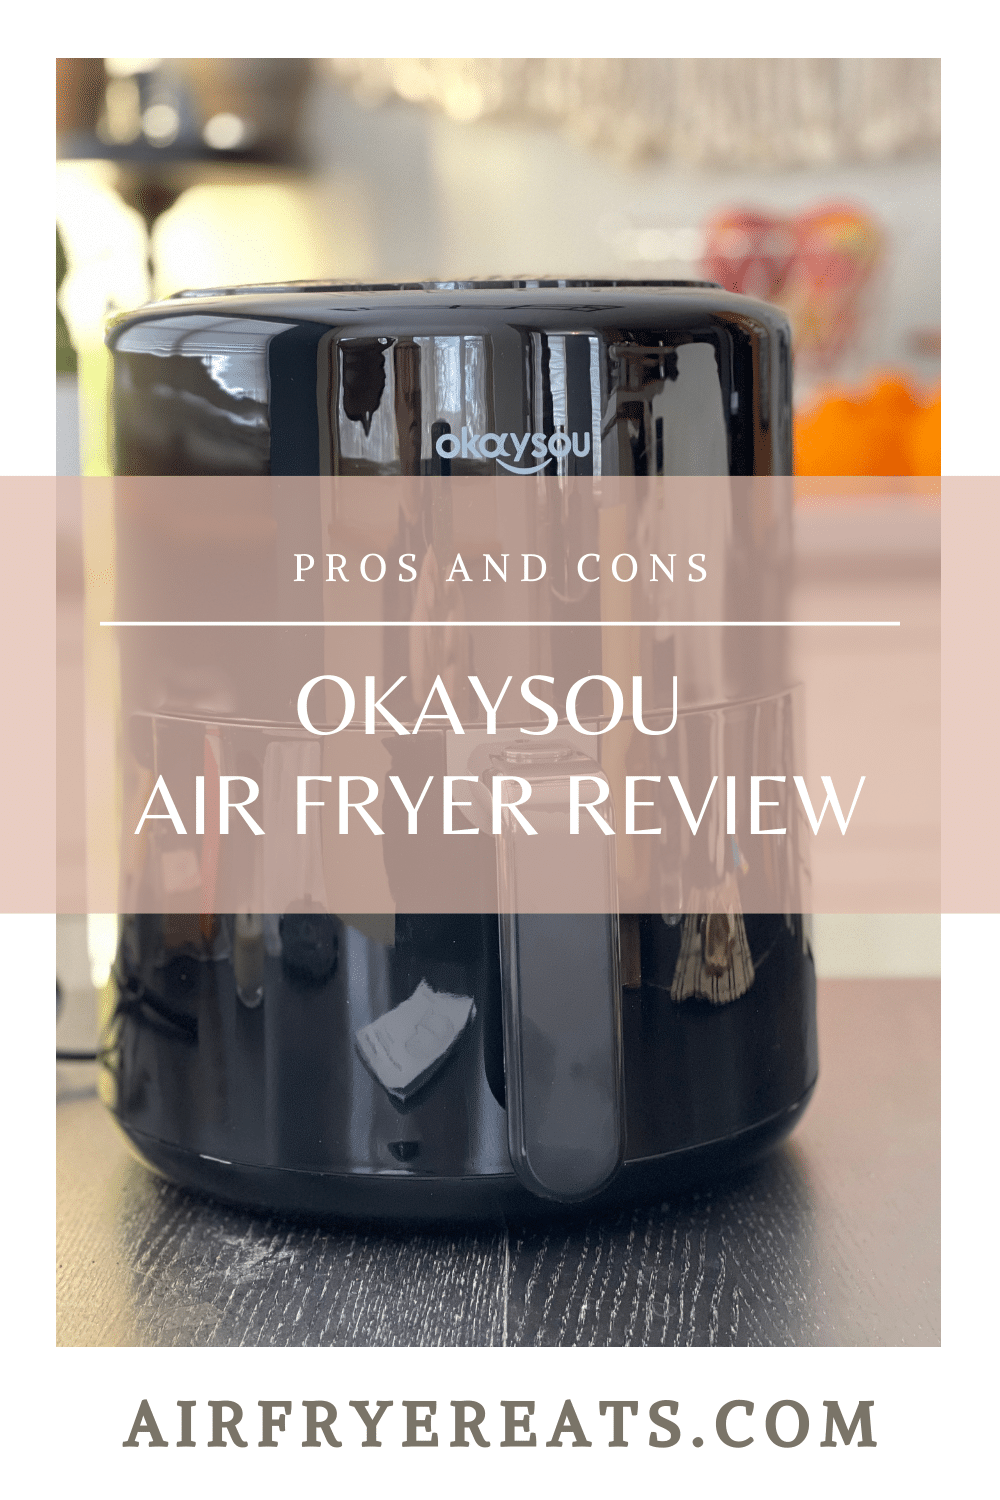 Looking at the okaysou air fryer to add to your kitchen arsenal? Check out the pros and cons of the okaysou air fryer! #airfryerreview #airfryer #okaysou via @vegetarianmamma